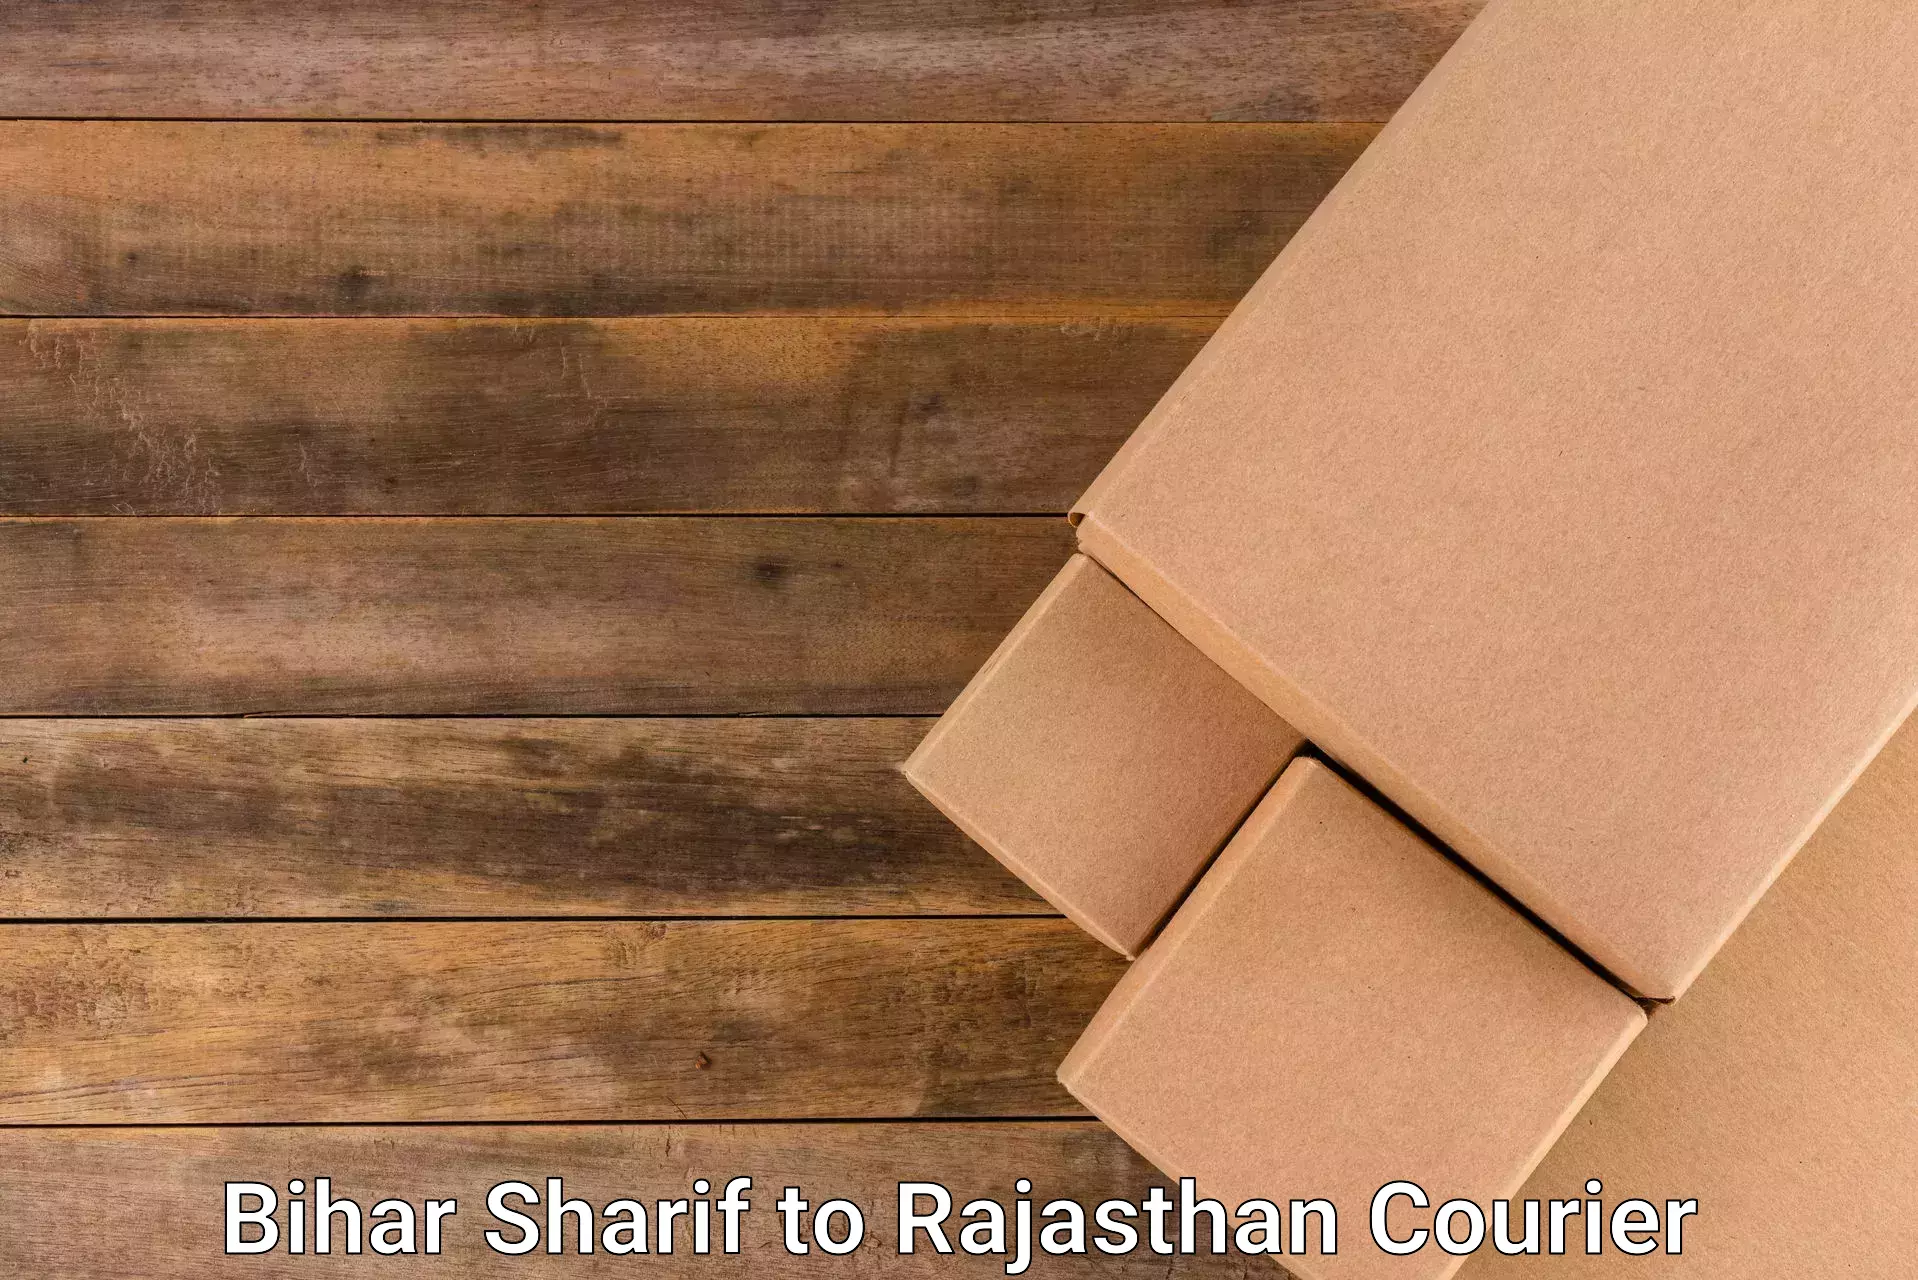 Reliable courier service Bihar Sharif to Piparcity